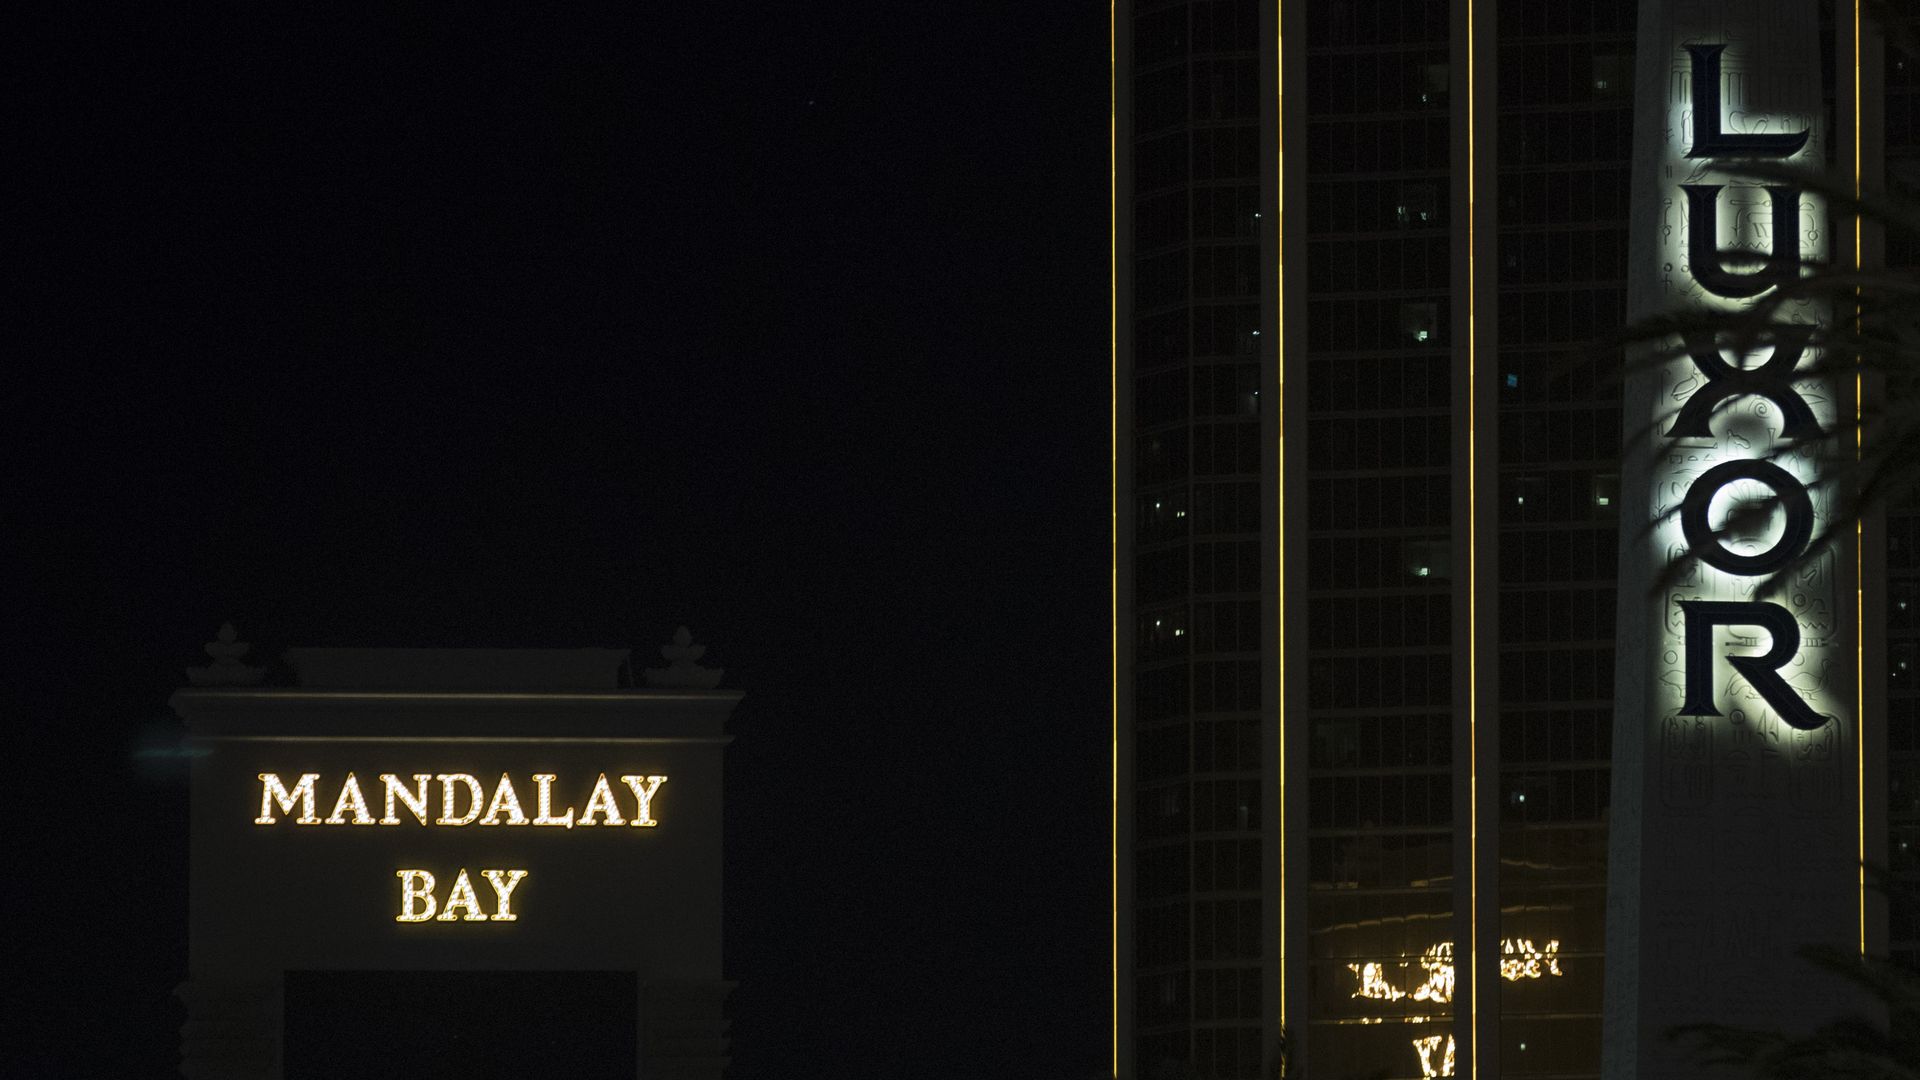 Mandalay Bay logo lit up in yellow with black background in nighttime.